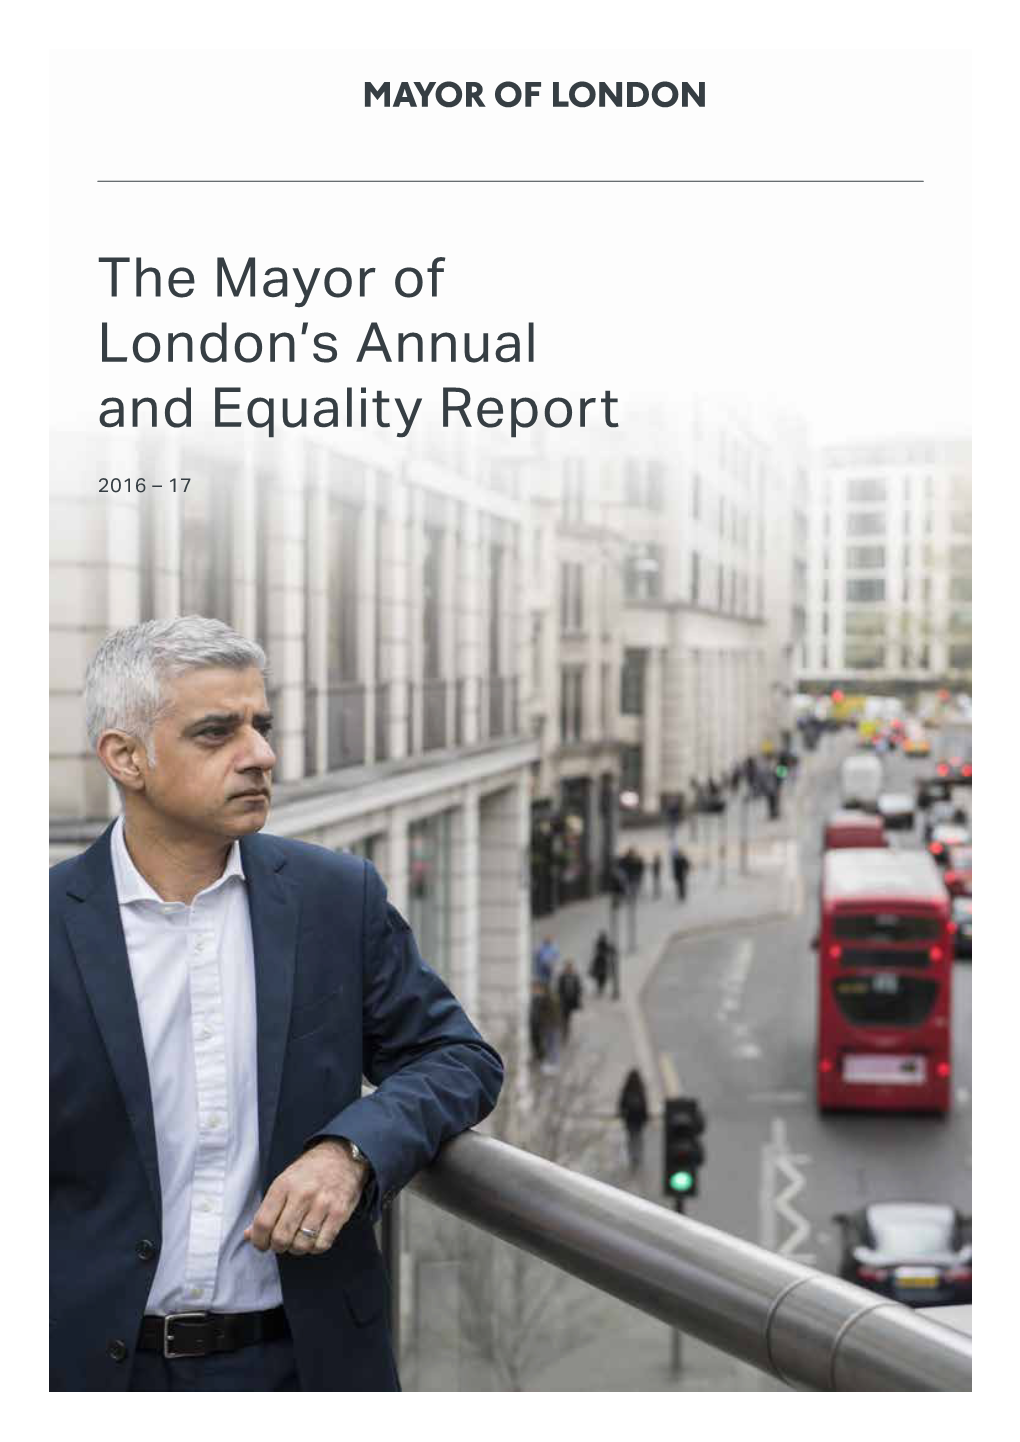 The Mayor of London's Annual and Equality Report